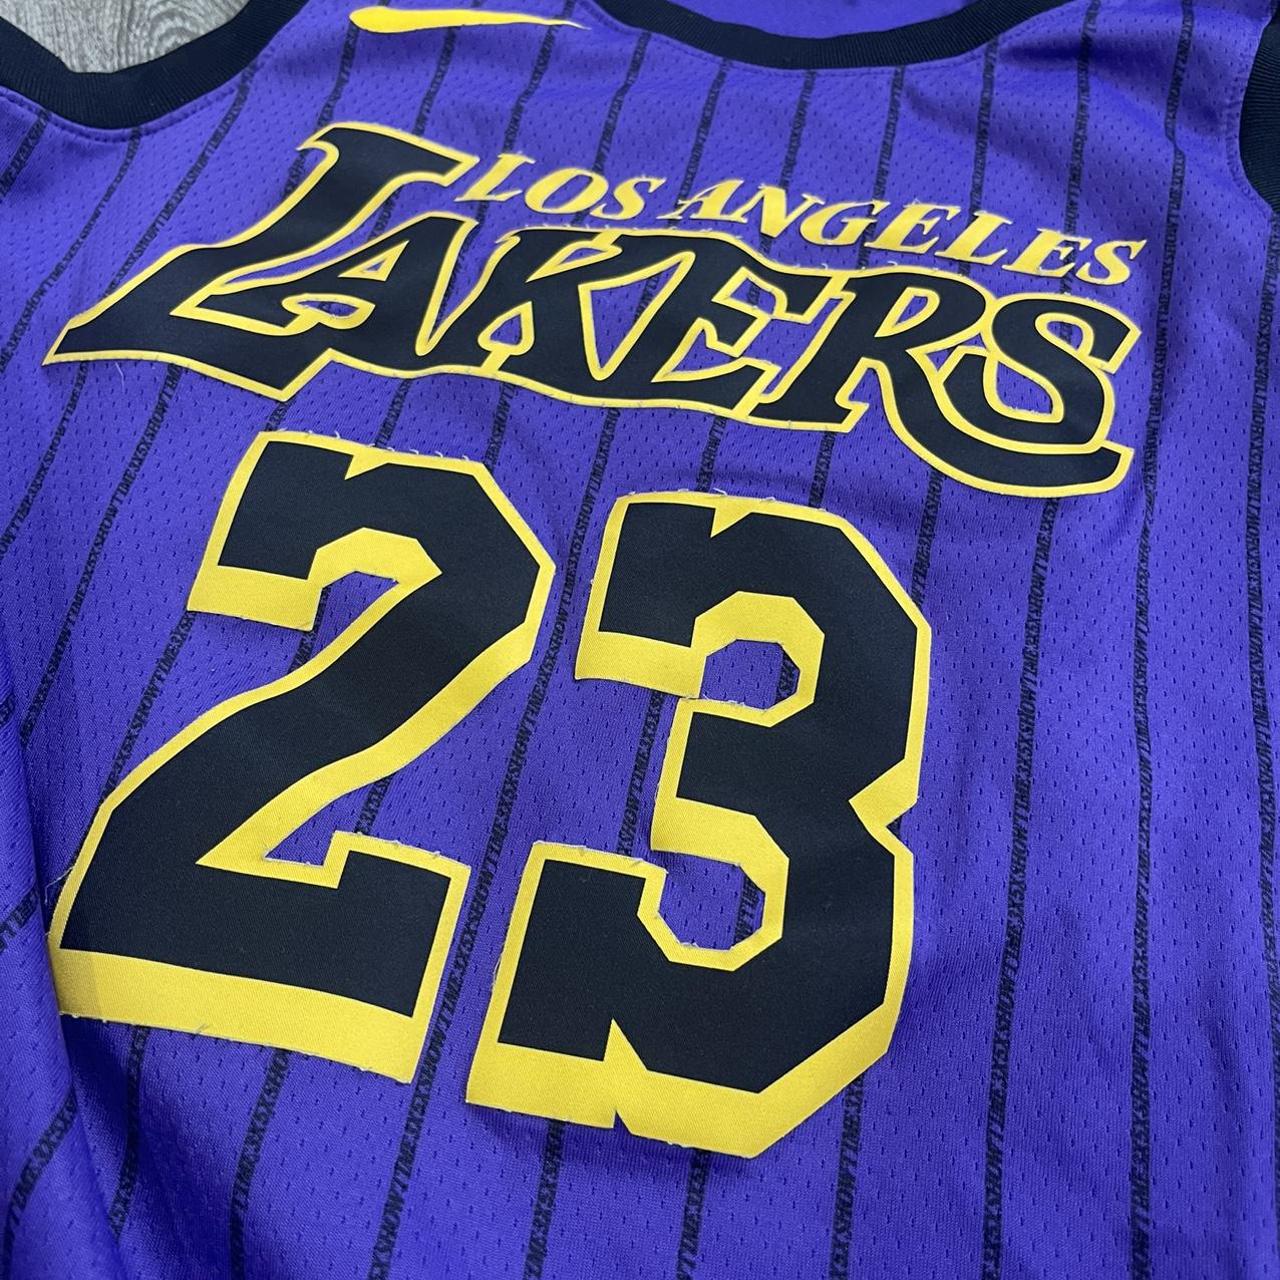 LAKERS LEBRON JAMES 23 HOME JERSEY STRAIGHT FROM THE - Depop